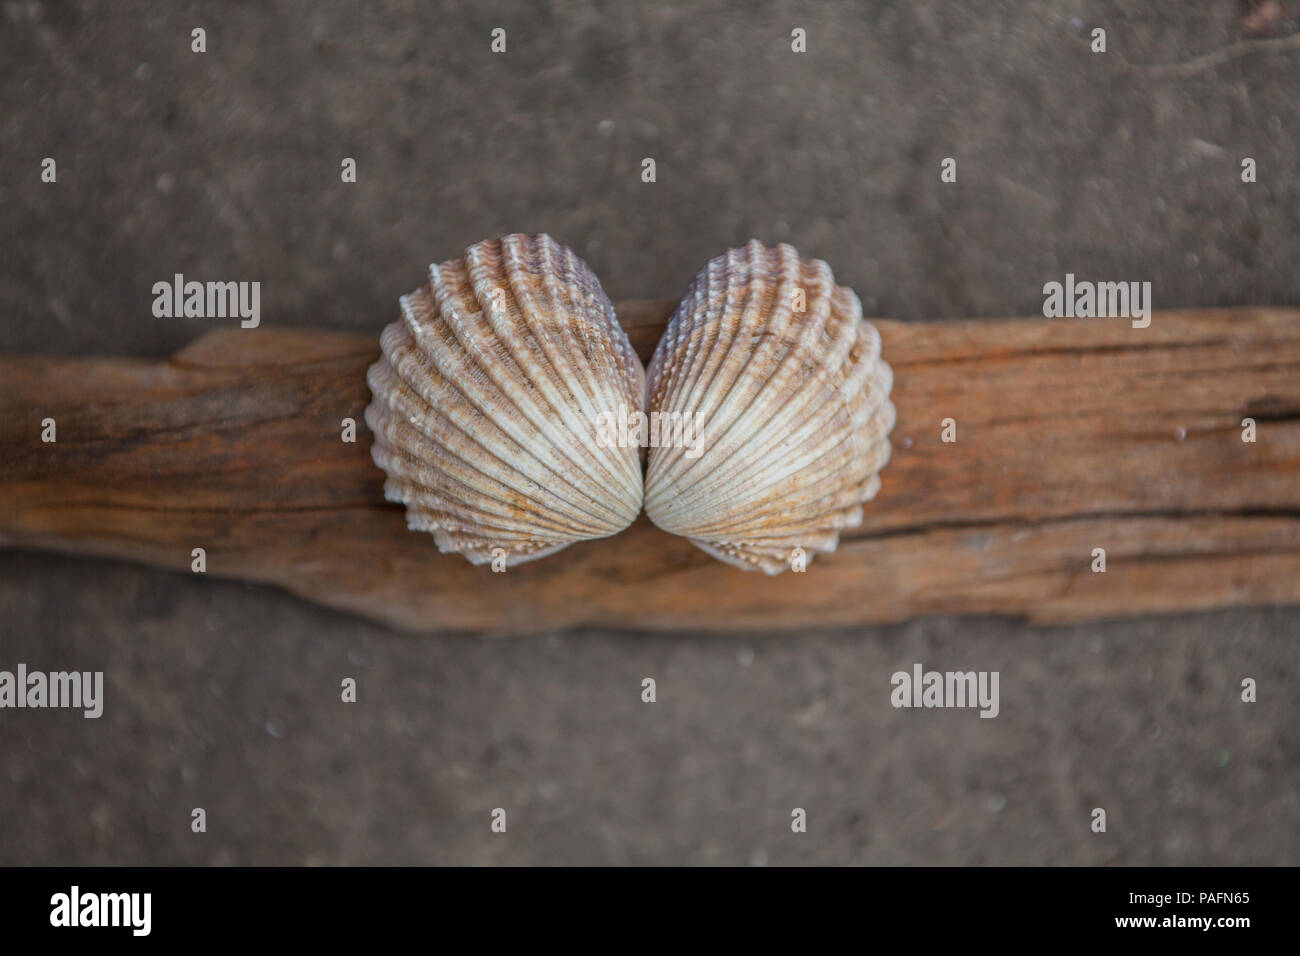 2 beautiful shells from the beach on a piece of driftwood Stock Photo